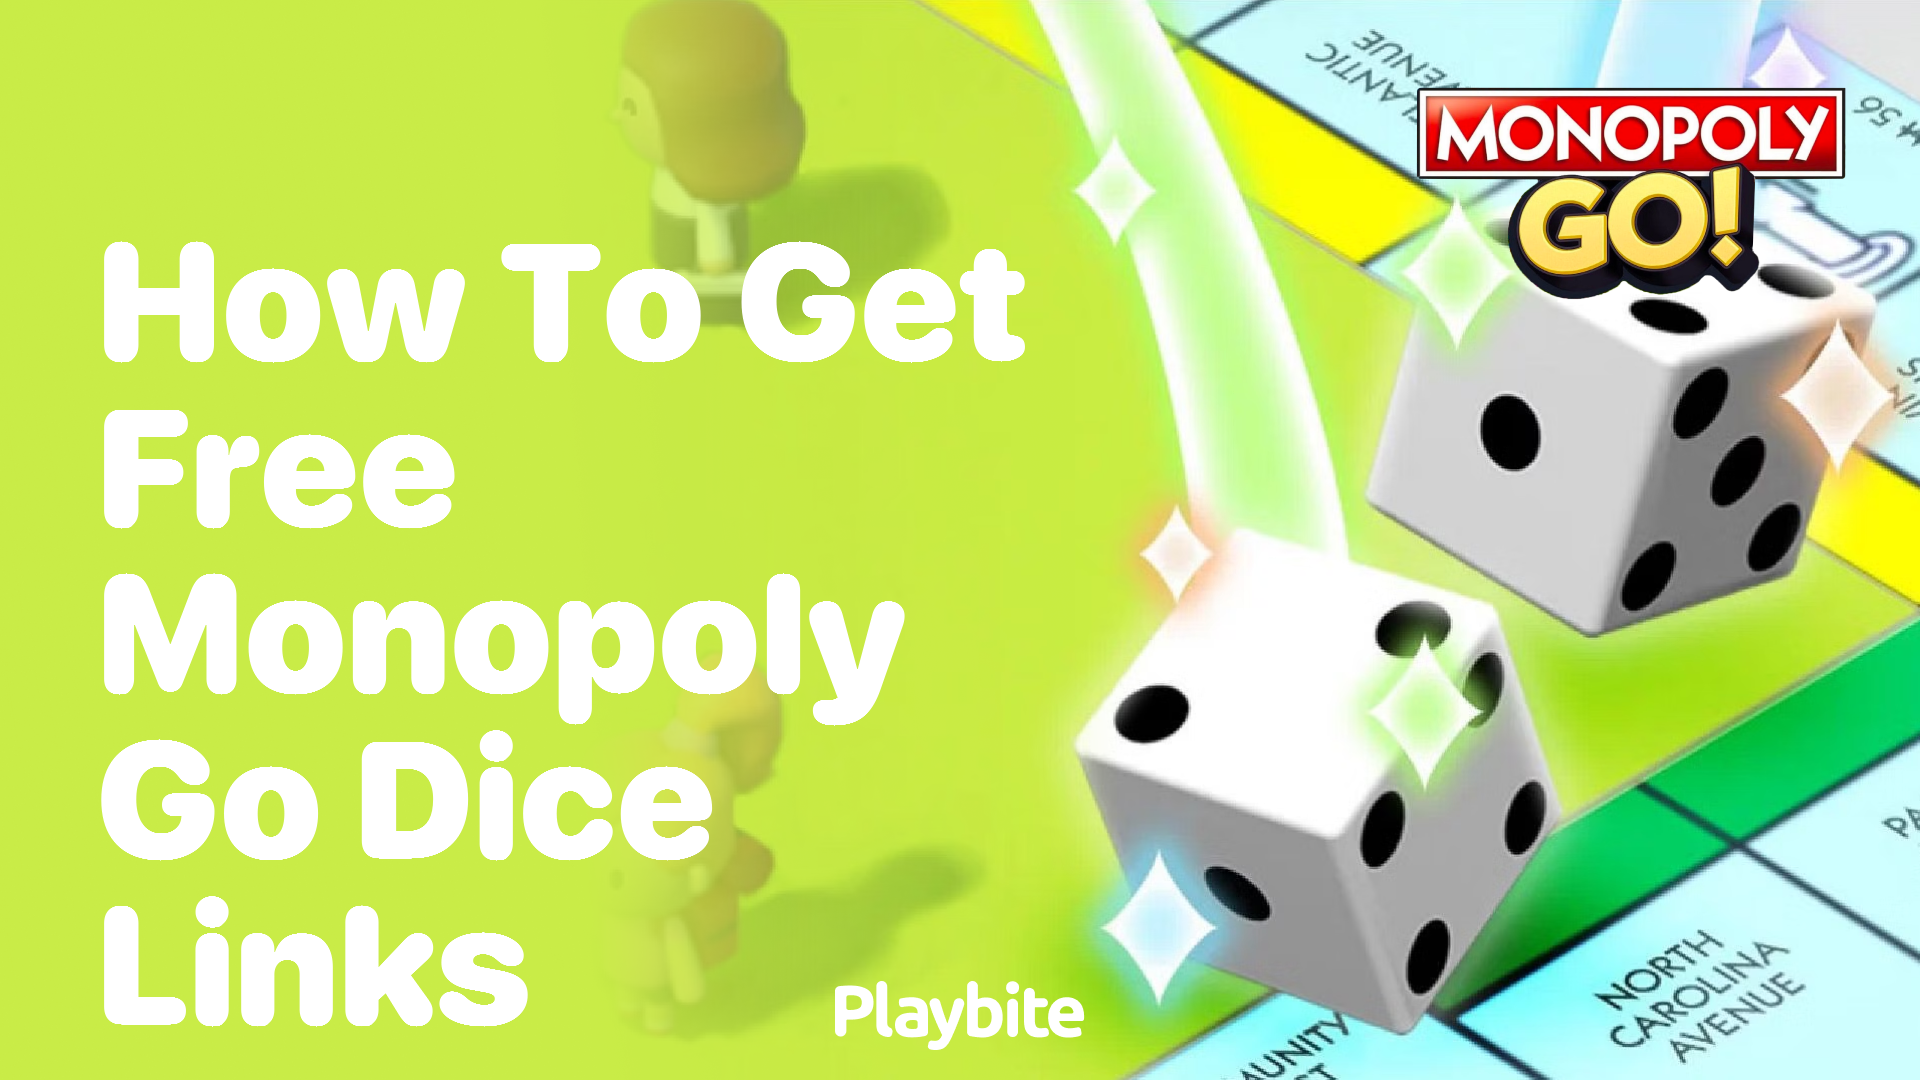 How to Get Free Monopoly Go Dice Links